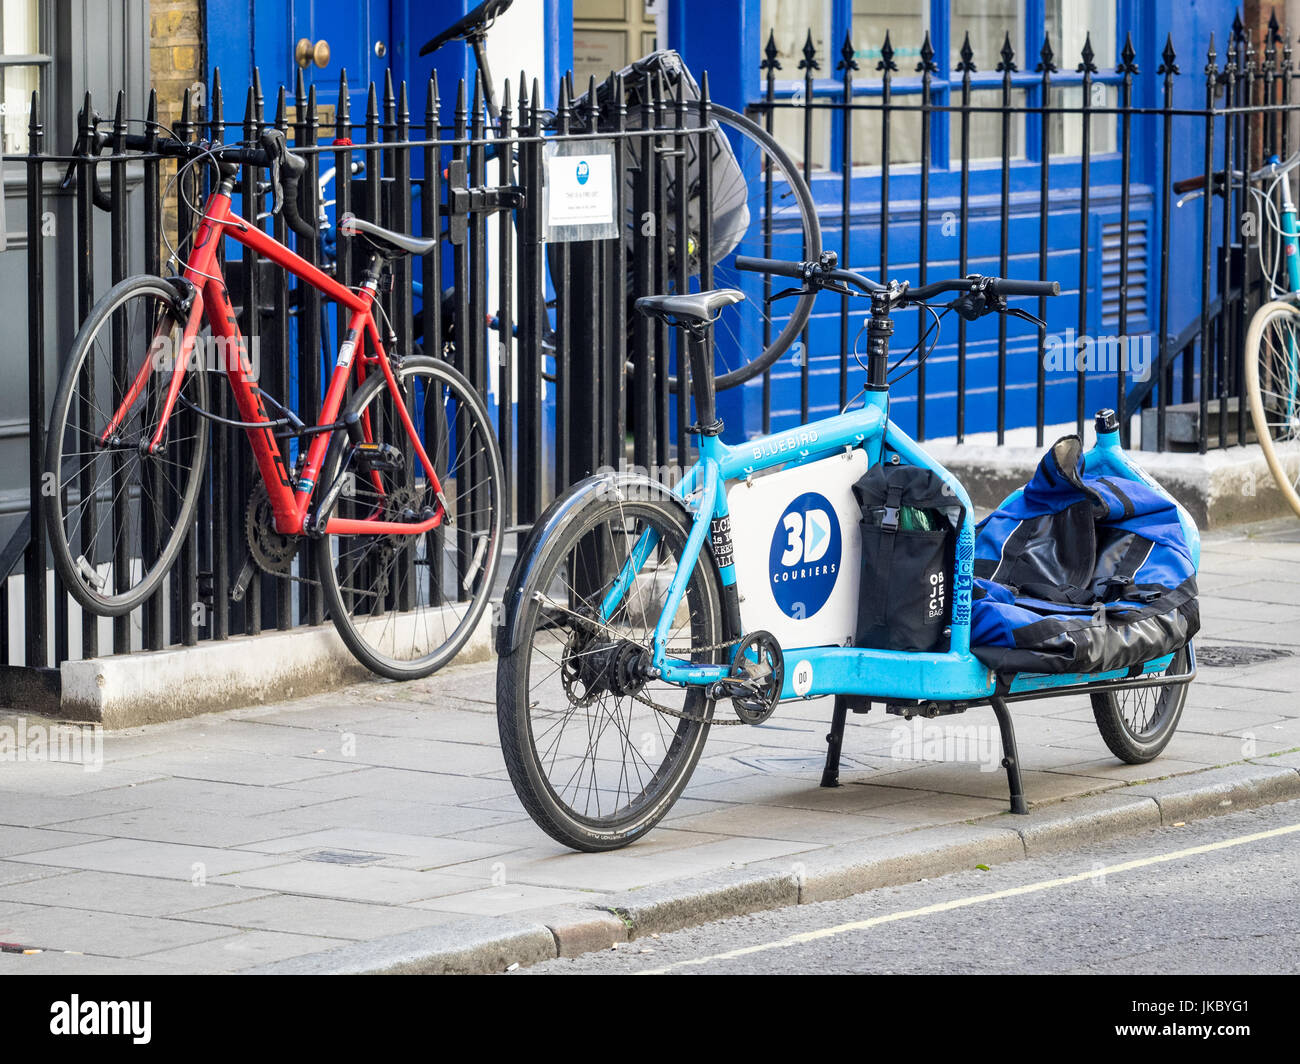 3D Couriers Cargo Bike parked in a street in Central London UK Stock Photo